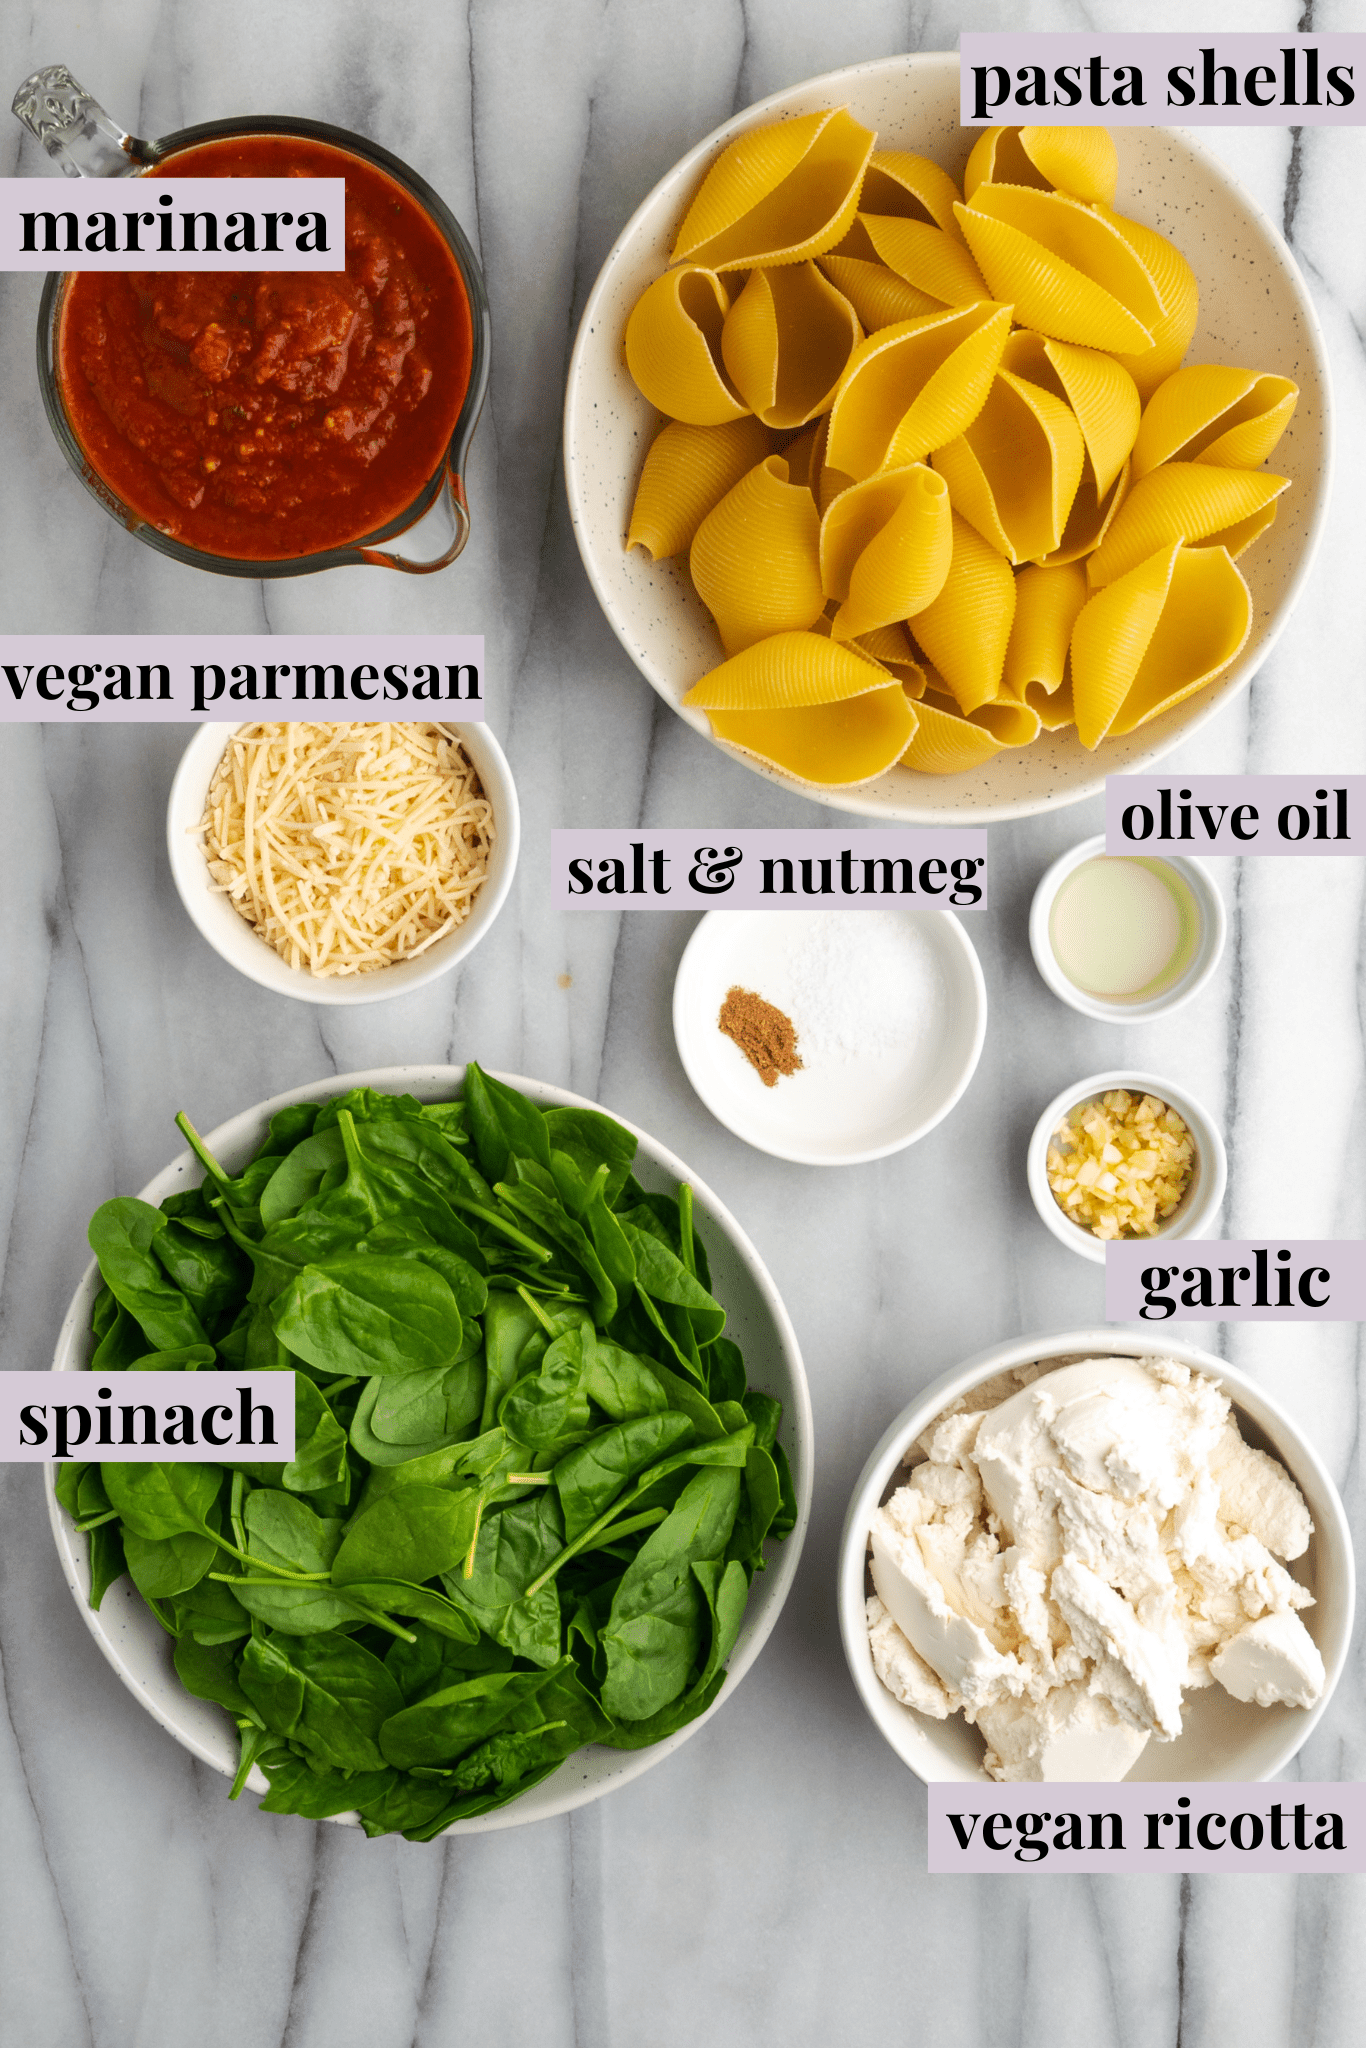 Ingredients for making stuffed vegan shells with labels